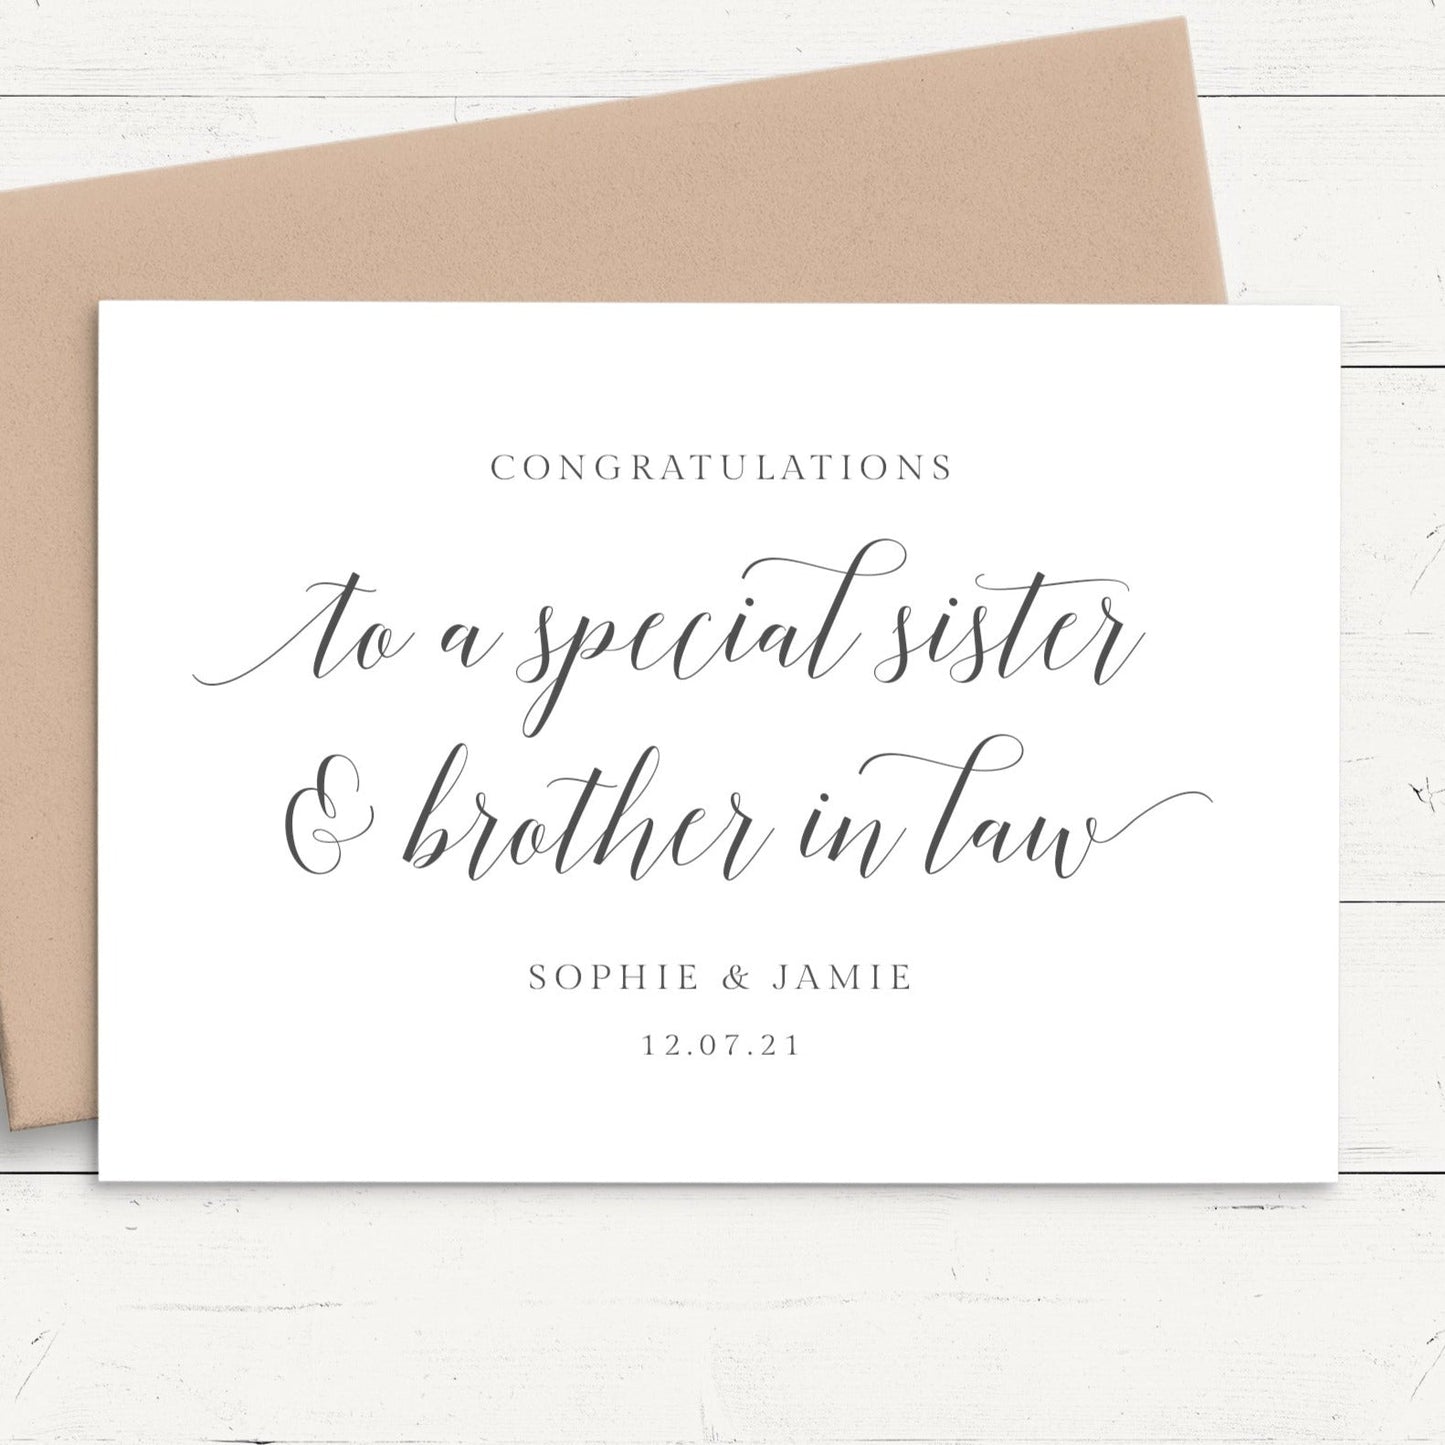 black and white modern script wedding card sister and brother in law personalised matte smooth white cardstock kraft brown envelope